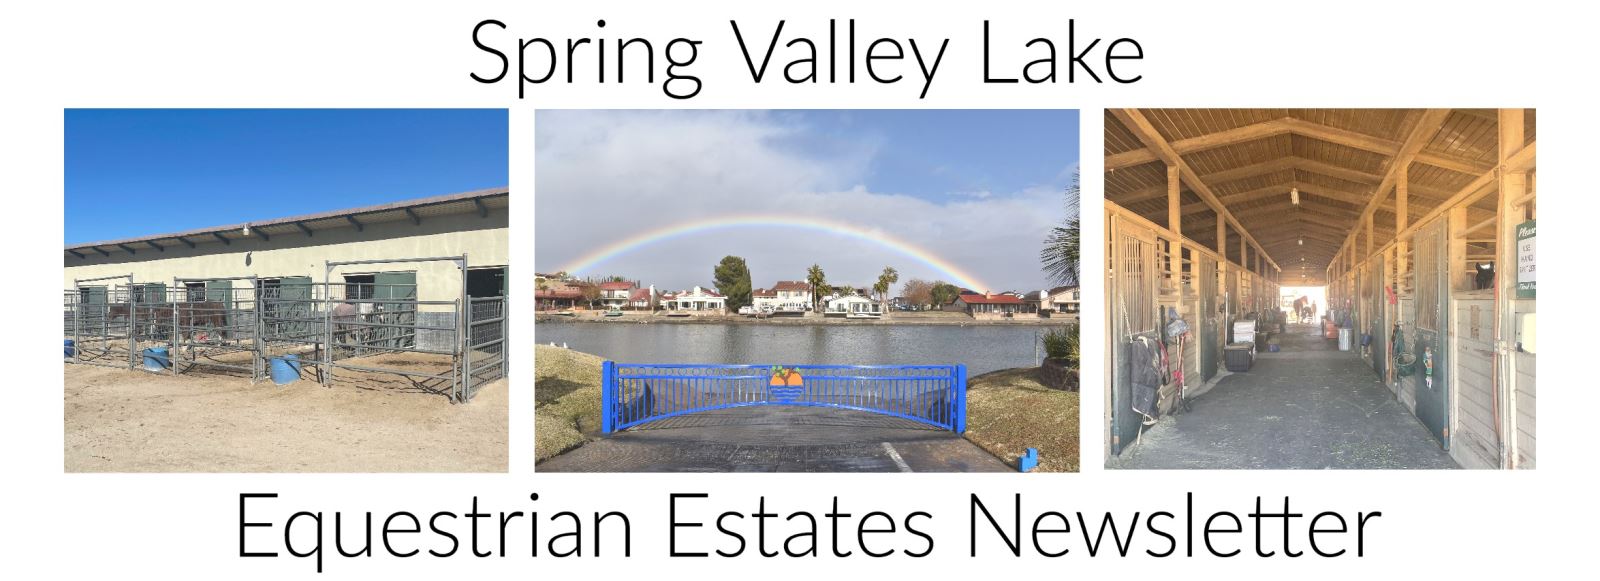 EQ Newsletter Banner: Displaying Horse stalls, boat ramp, and horse barn